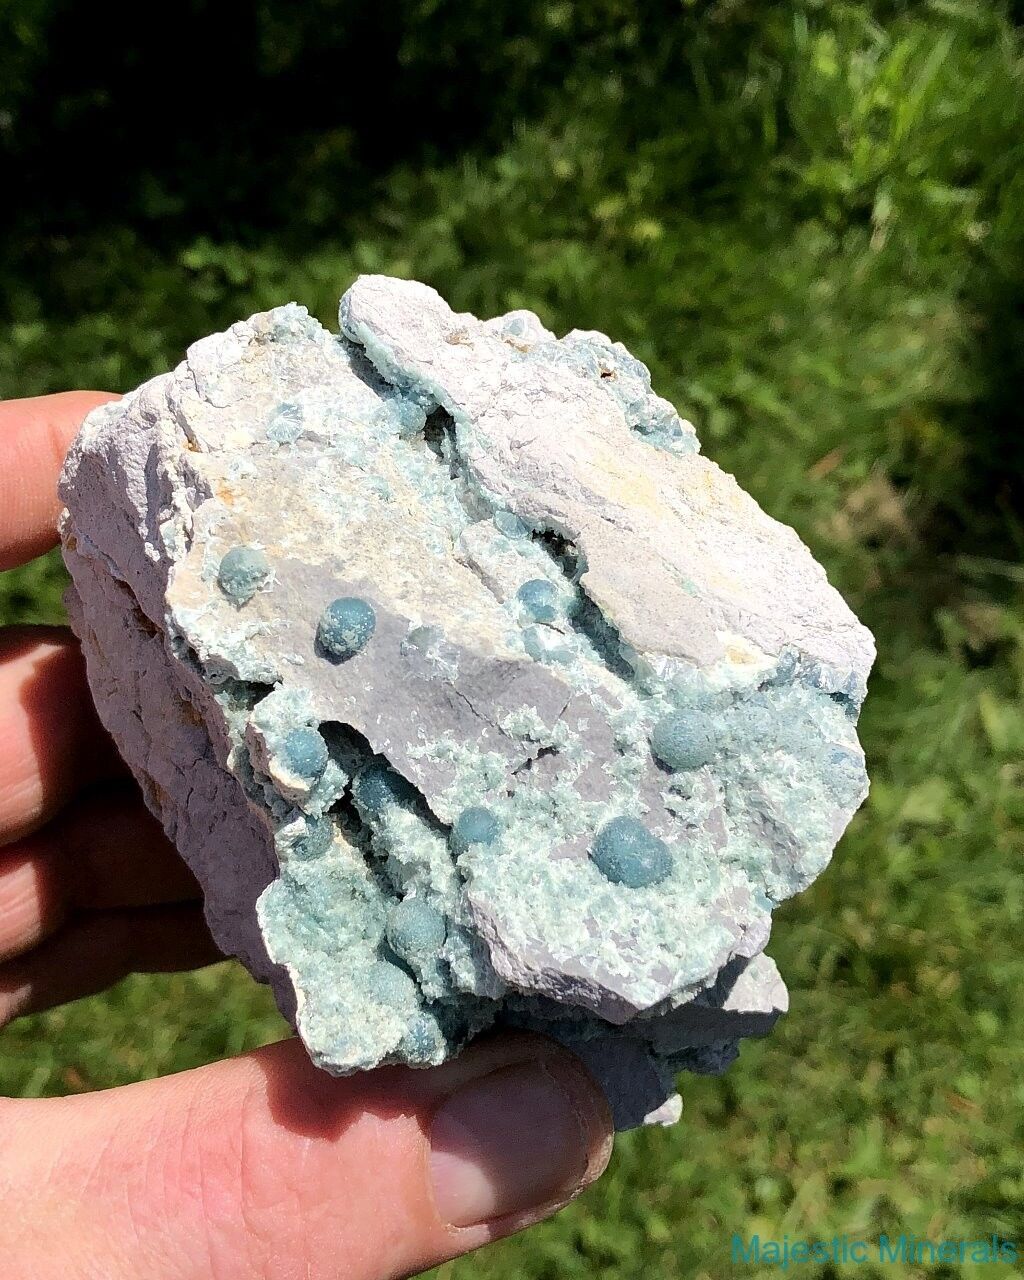 HIGH END___NEW FIND___HUGE EXTREMELY VERY , VERY RARE BLUE Wavellite___Arkansas